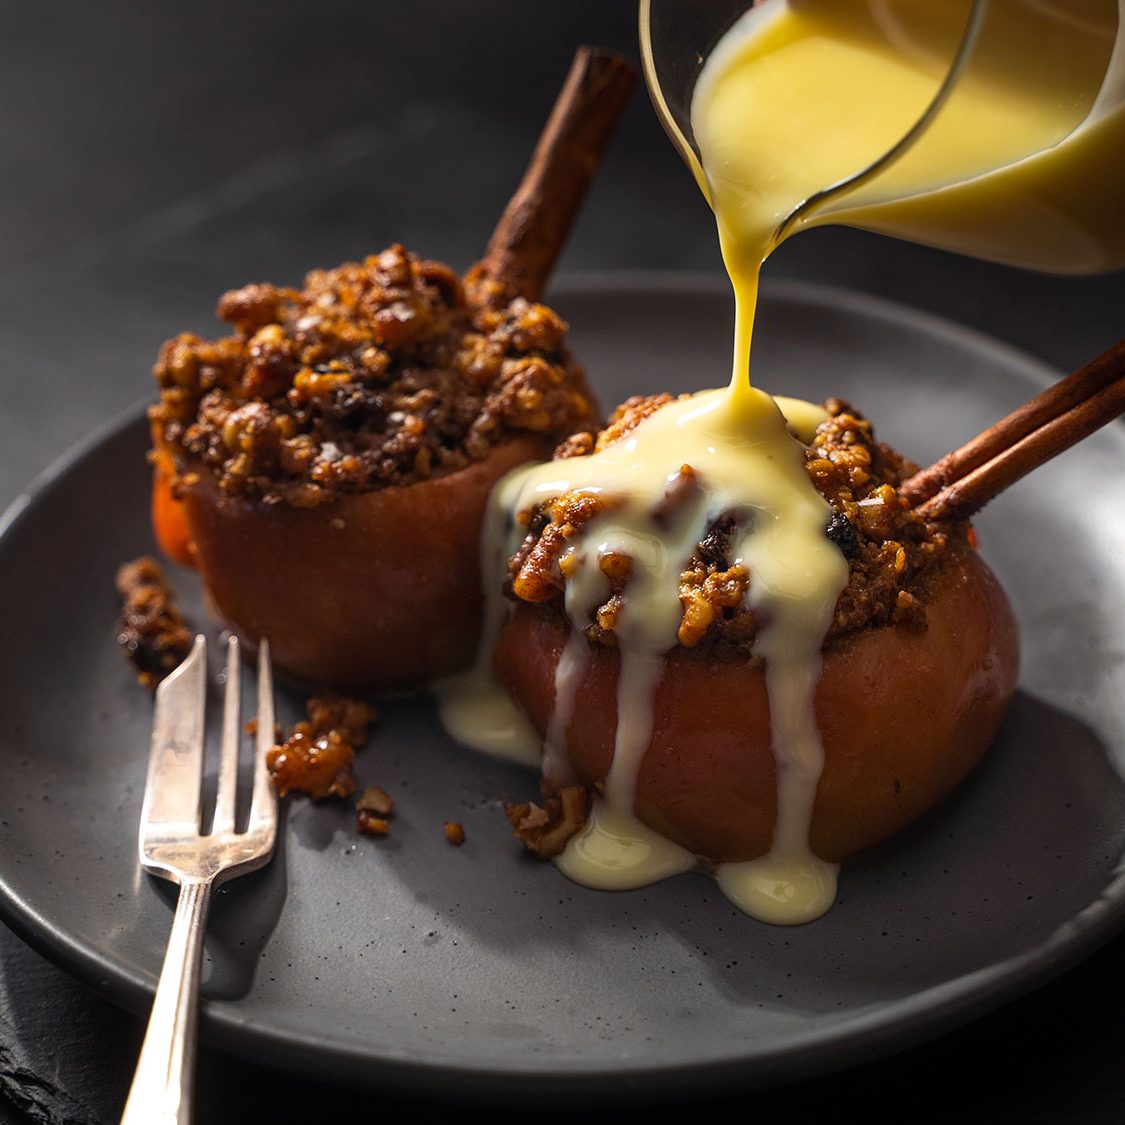 Baked apples with walnuts and raisins